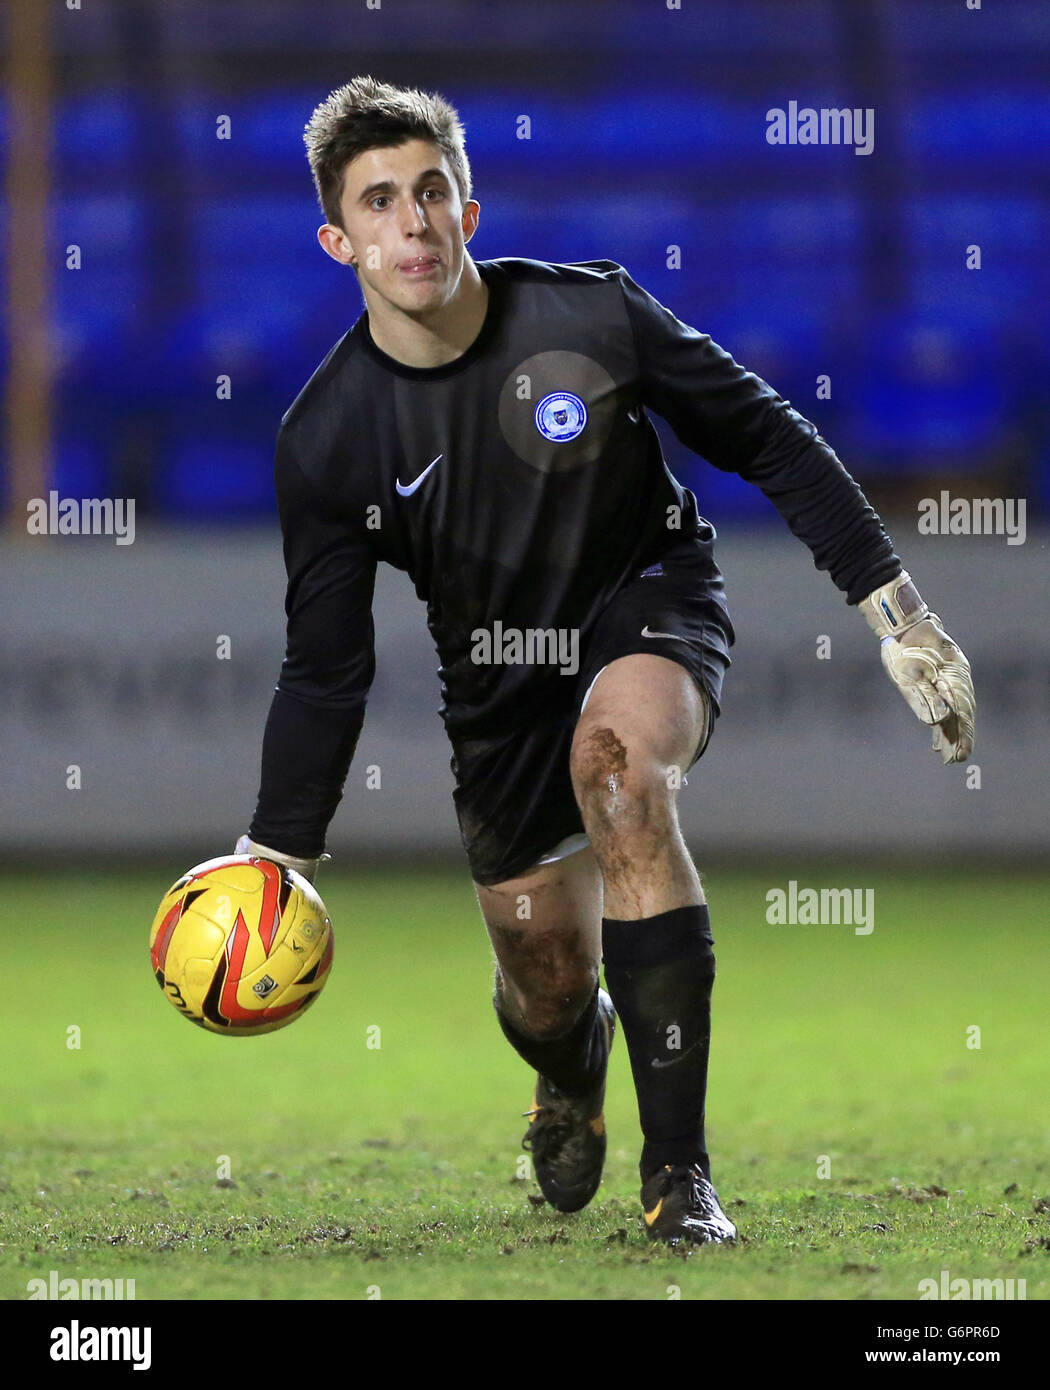 Soccer - FA Youth Cup - Fourth Round - Peterborough United v Arsenal - London Road. Peterborough United's Luke O'Reilly Stock Photo